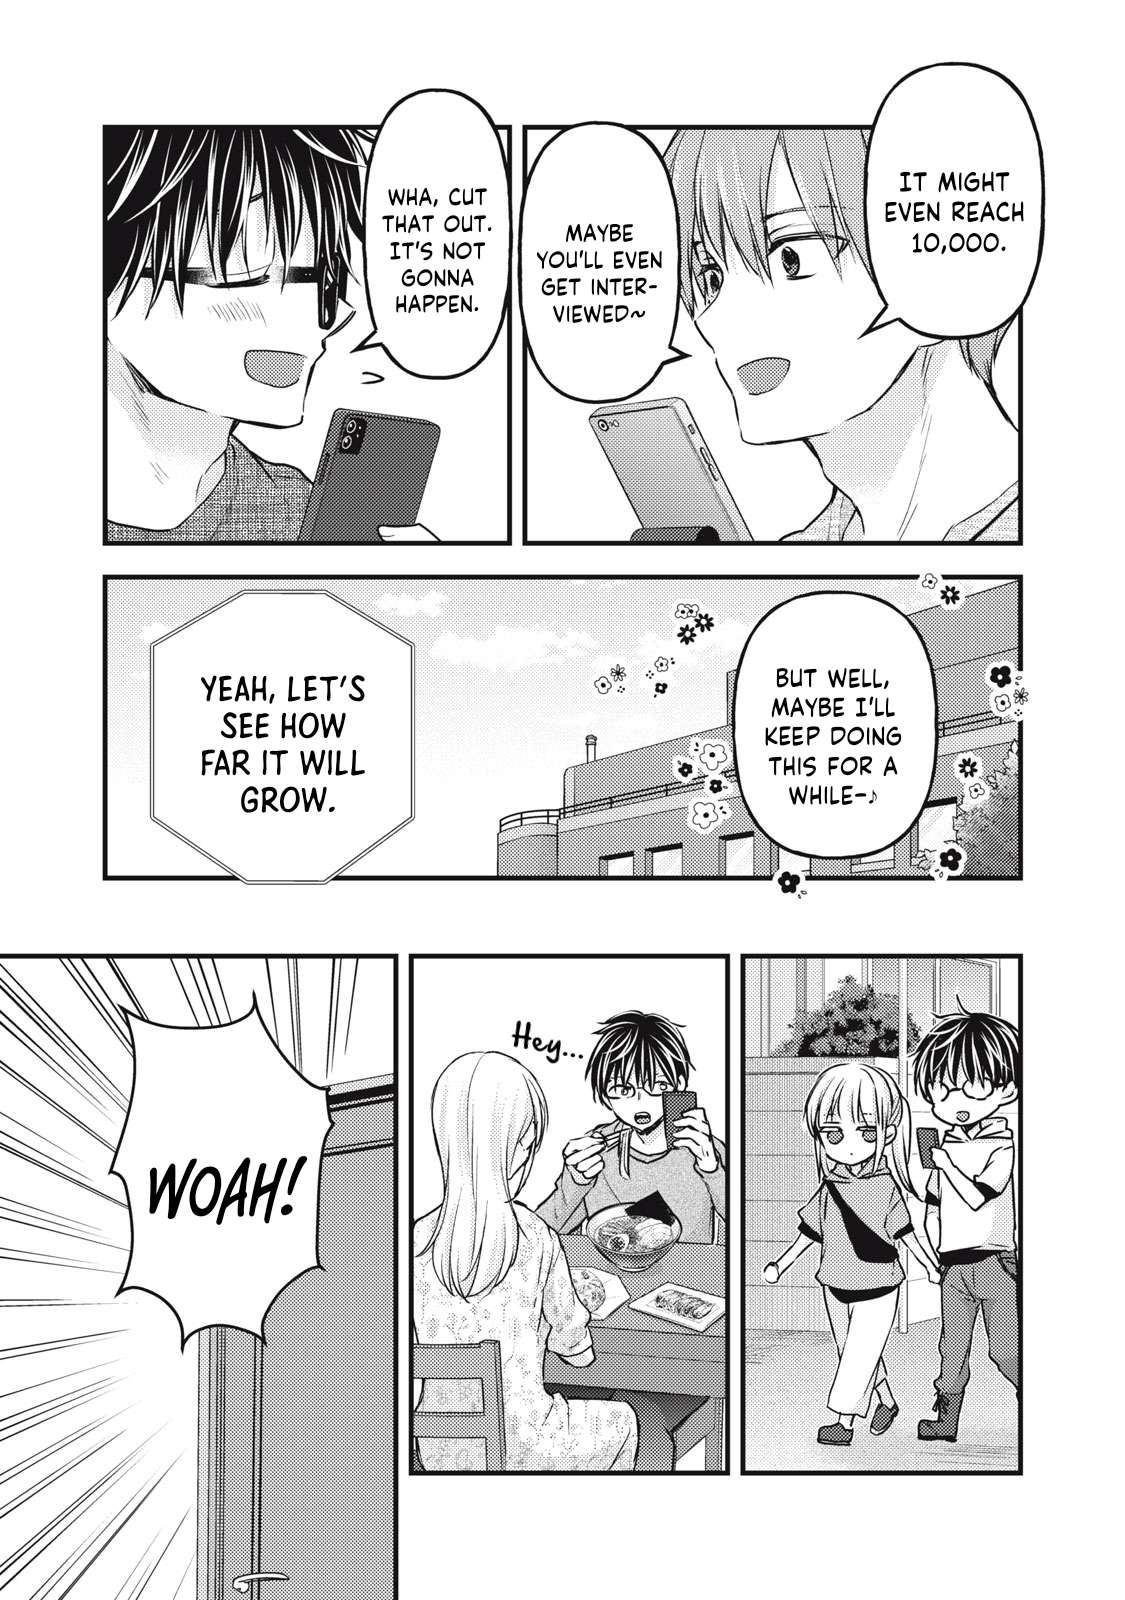 We May Be an Inexperienced Couple but... chapter 124 page 8